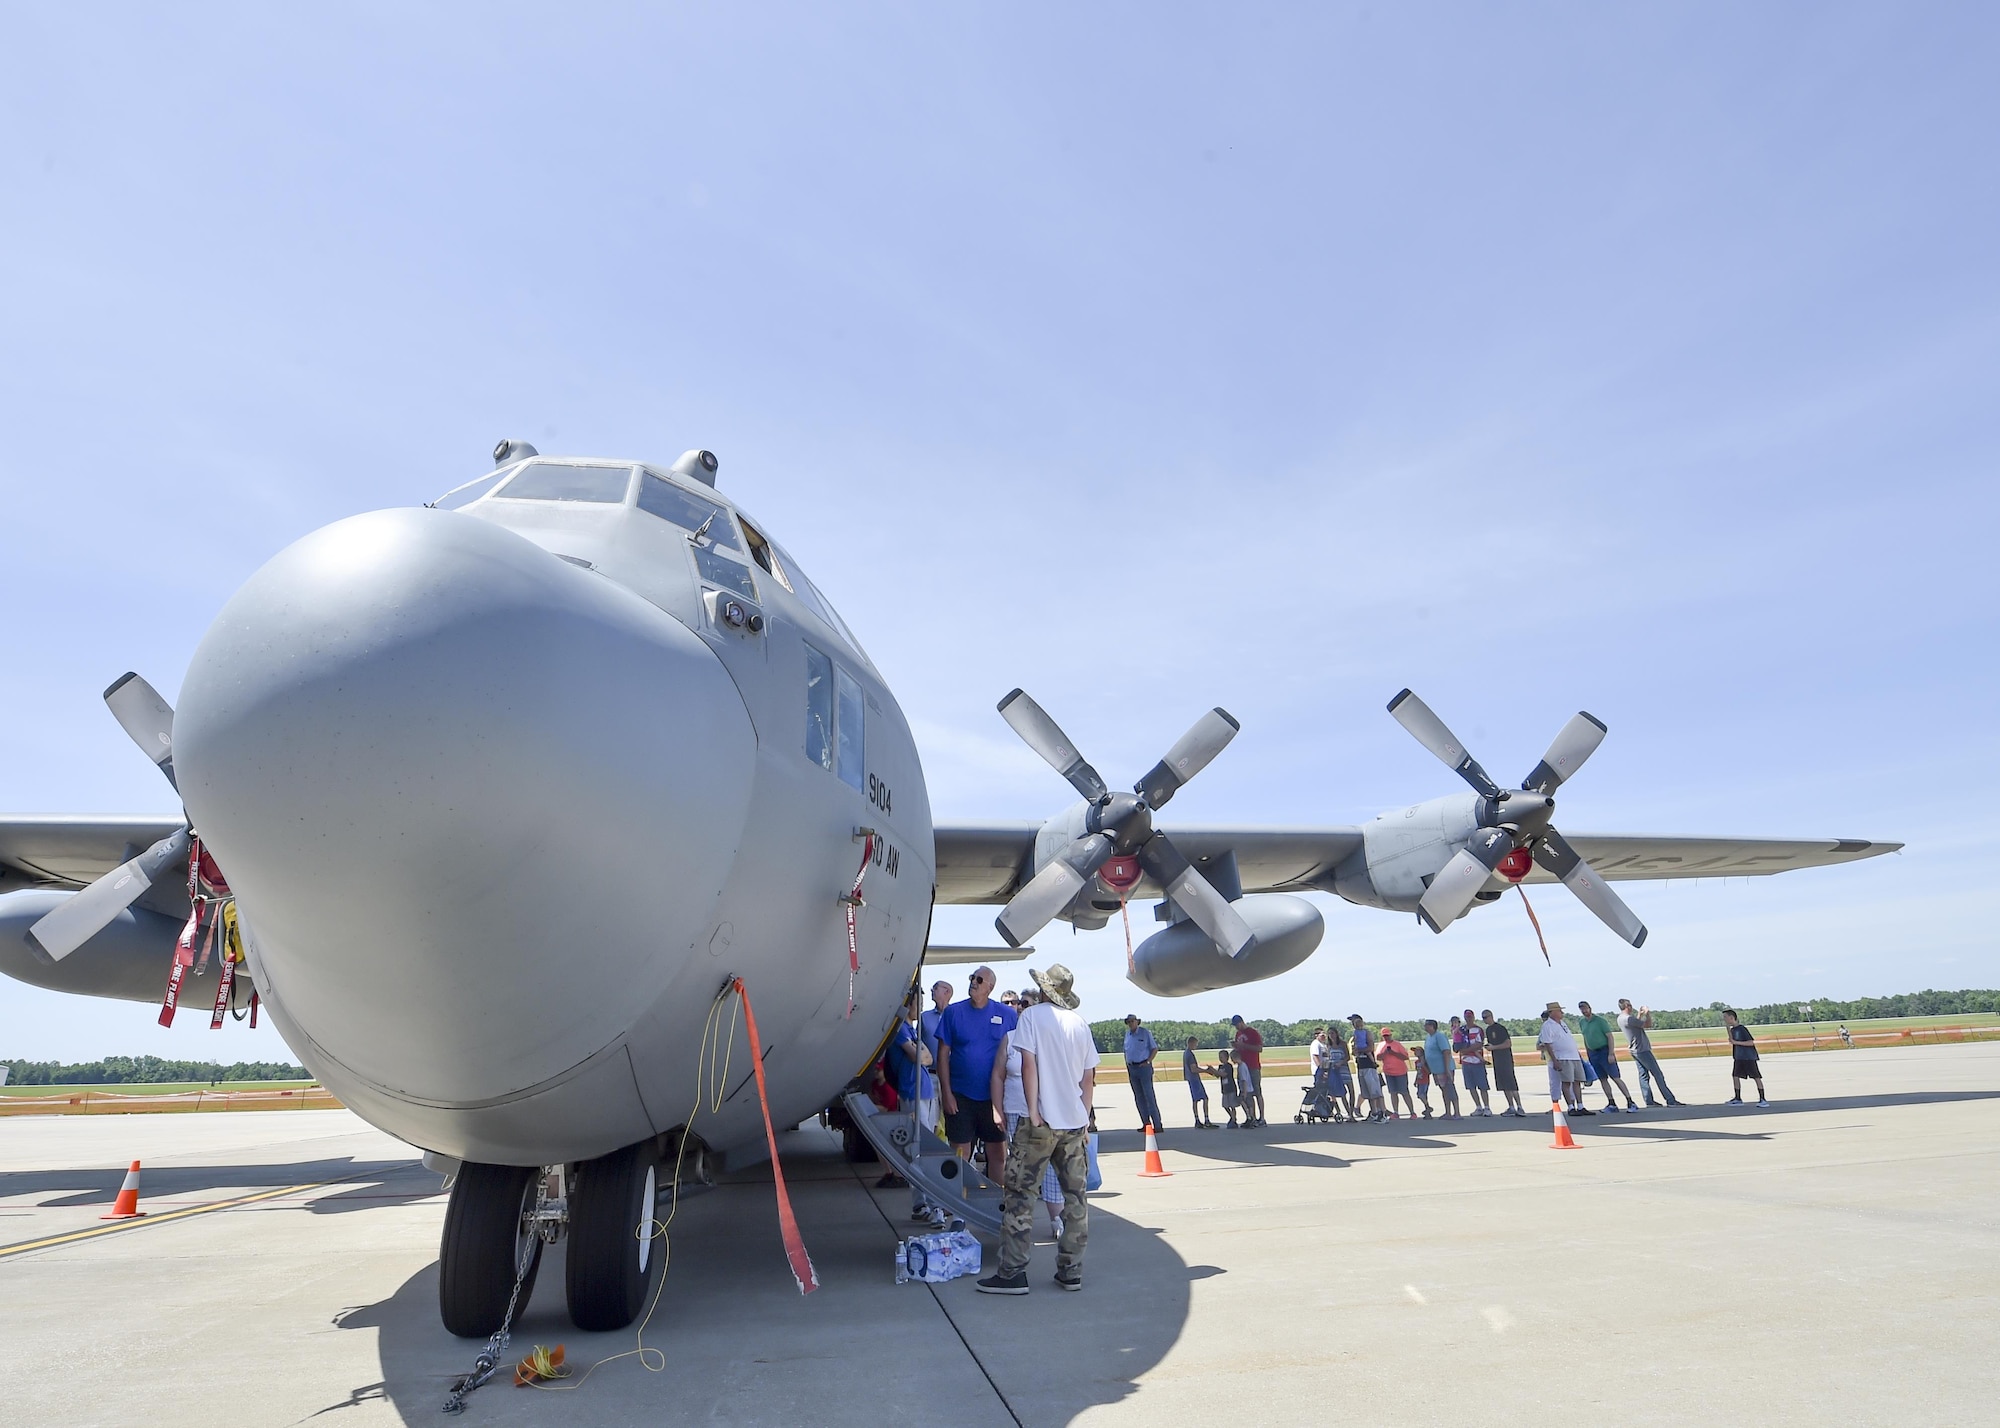 Guests line up to walk through a 910th Airlift Wing C-130 Hercules aircraft during the 2016 Youngstown Air Reserve Station Open House here, June 16, 2016. The Youngstown Air Reserve Station Open House drew approximately 7000 guests to see the equipment, mission and personnel of YARS. (U.S. Air Force photo/Eric White)